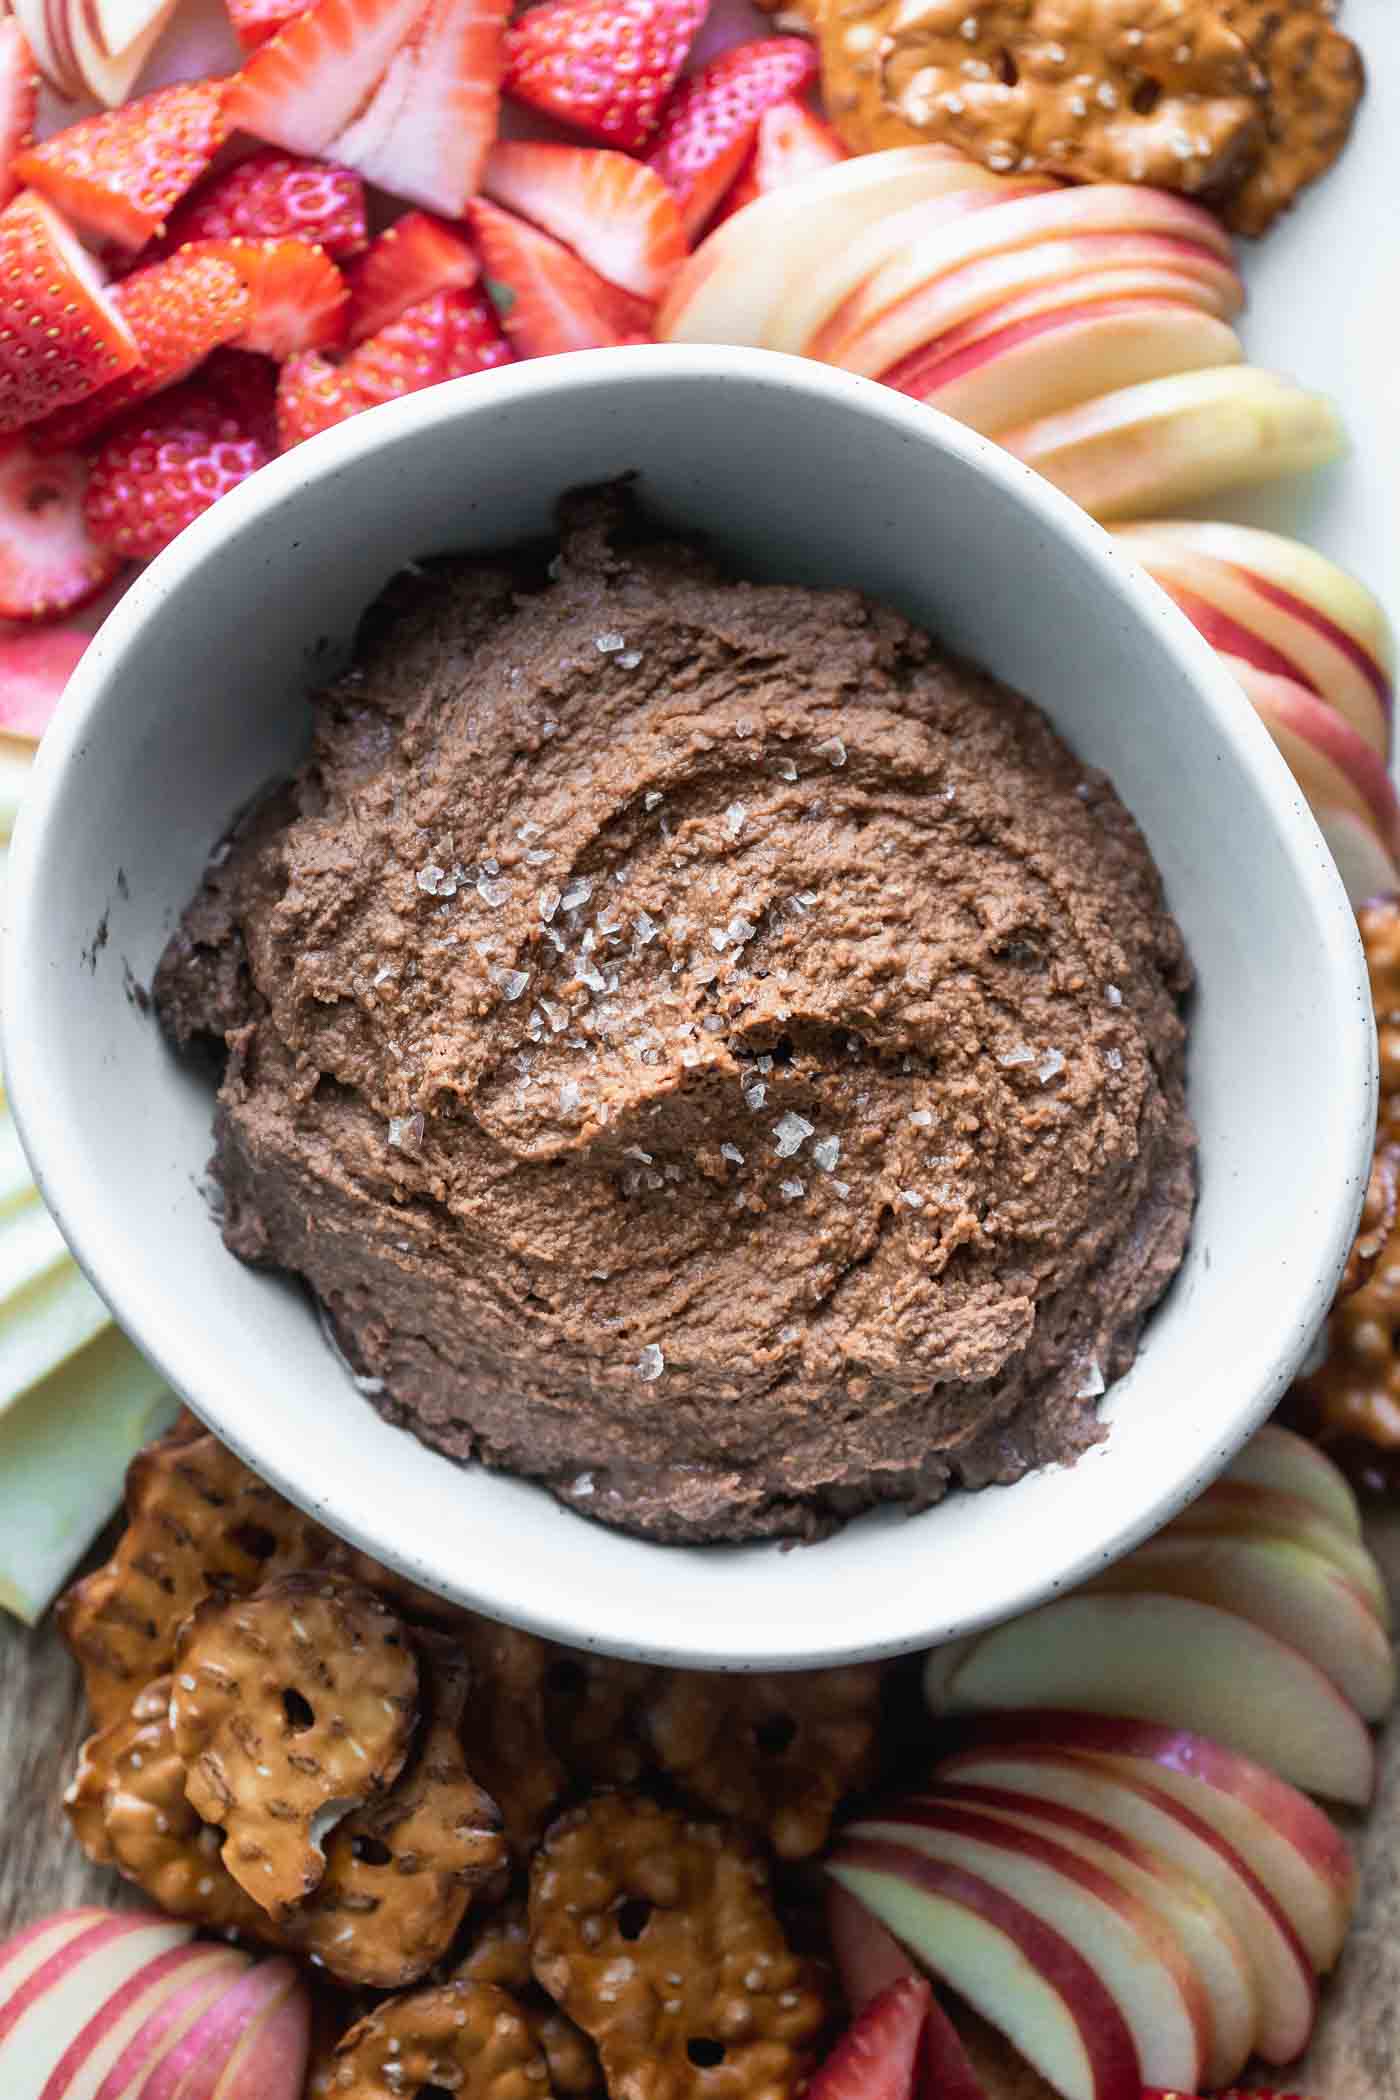 Chocolate Hummus - Cooking for Keeps